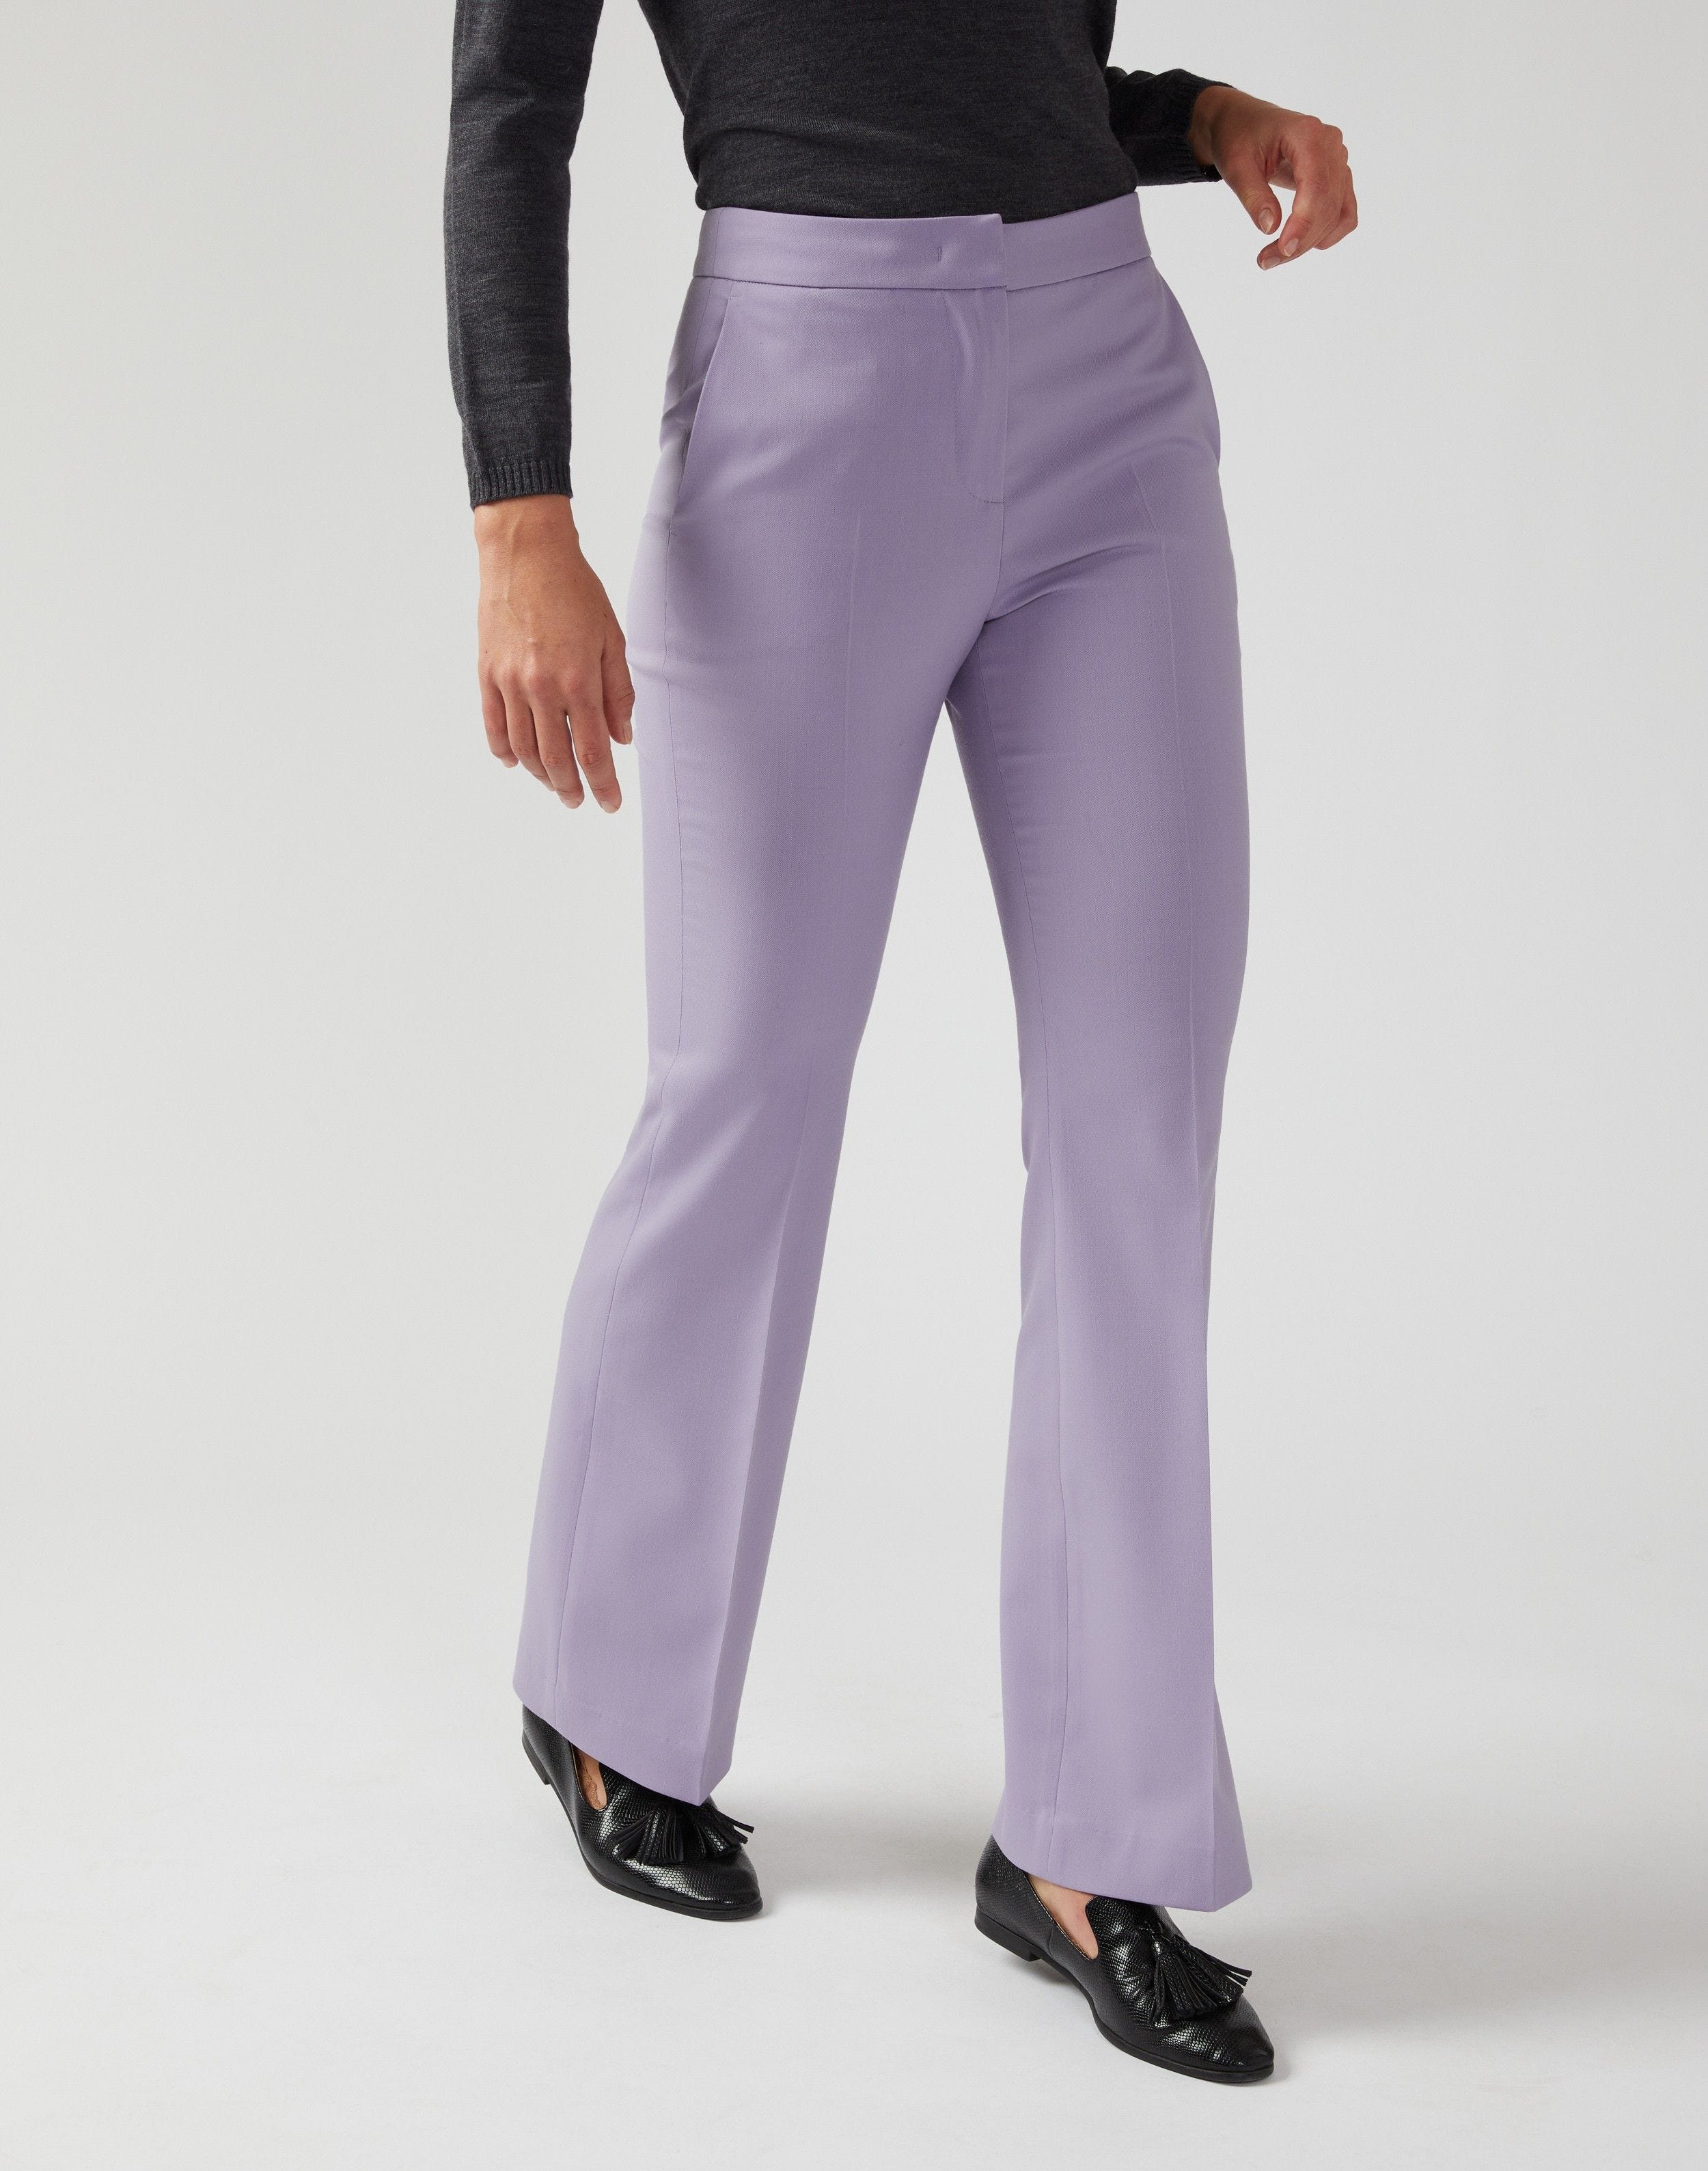 Bell-bottom trousers in cool lilac wool